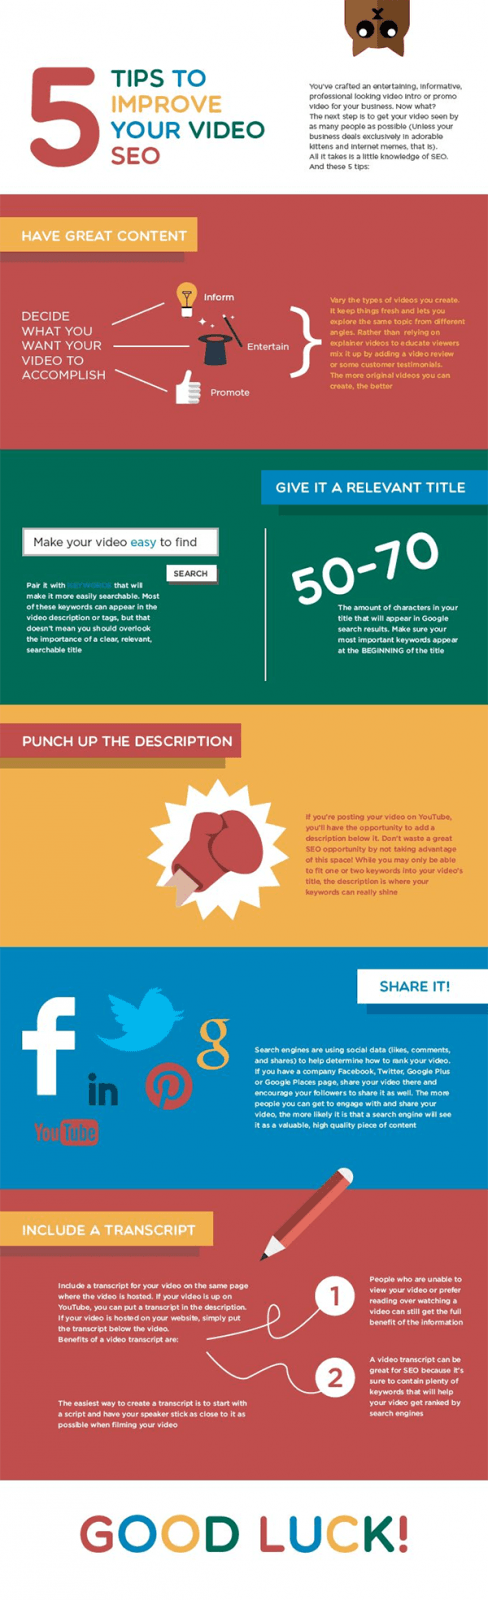 5 Tips to Improve Your Video SEO - Infographic